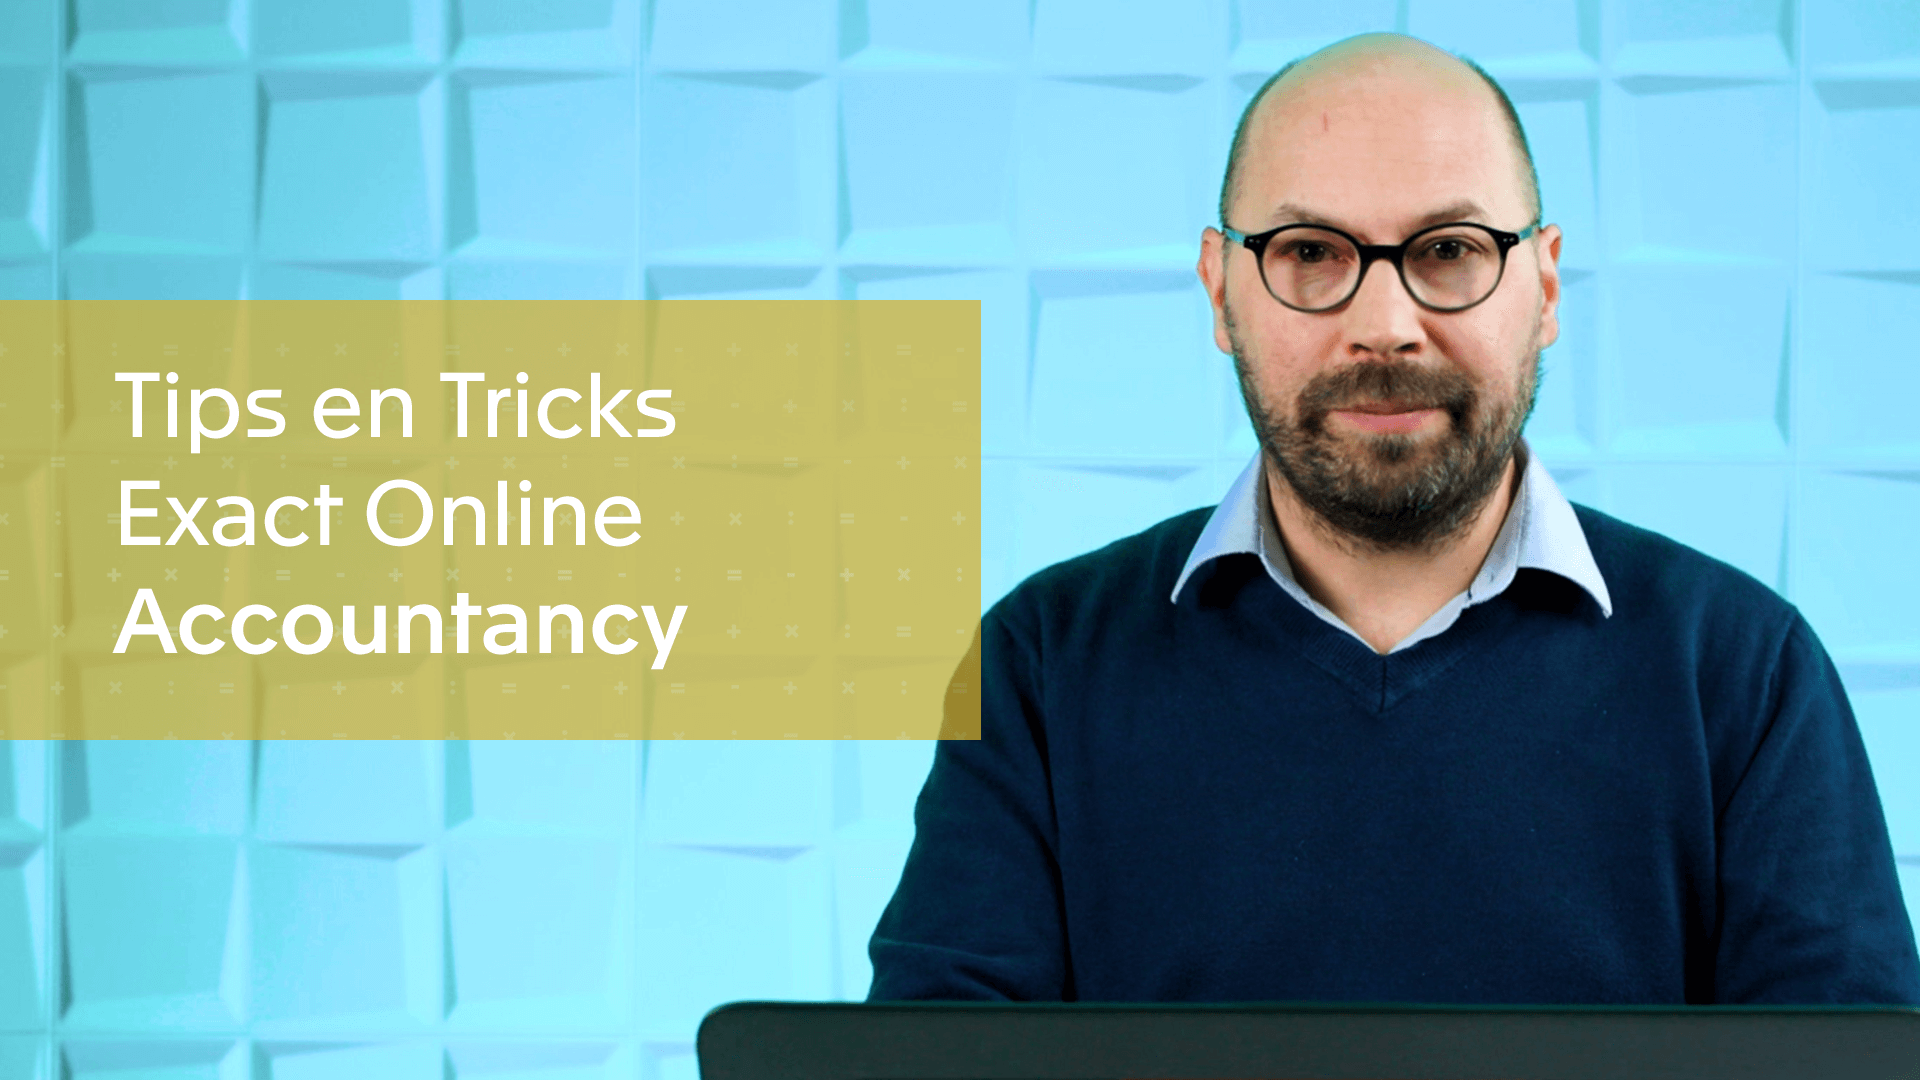 Tips and tricks Exact Online Accountancy